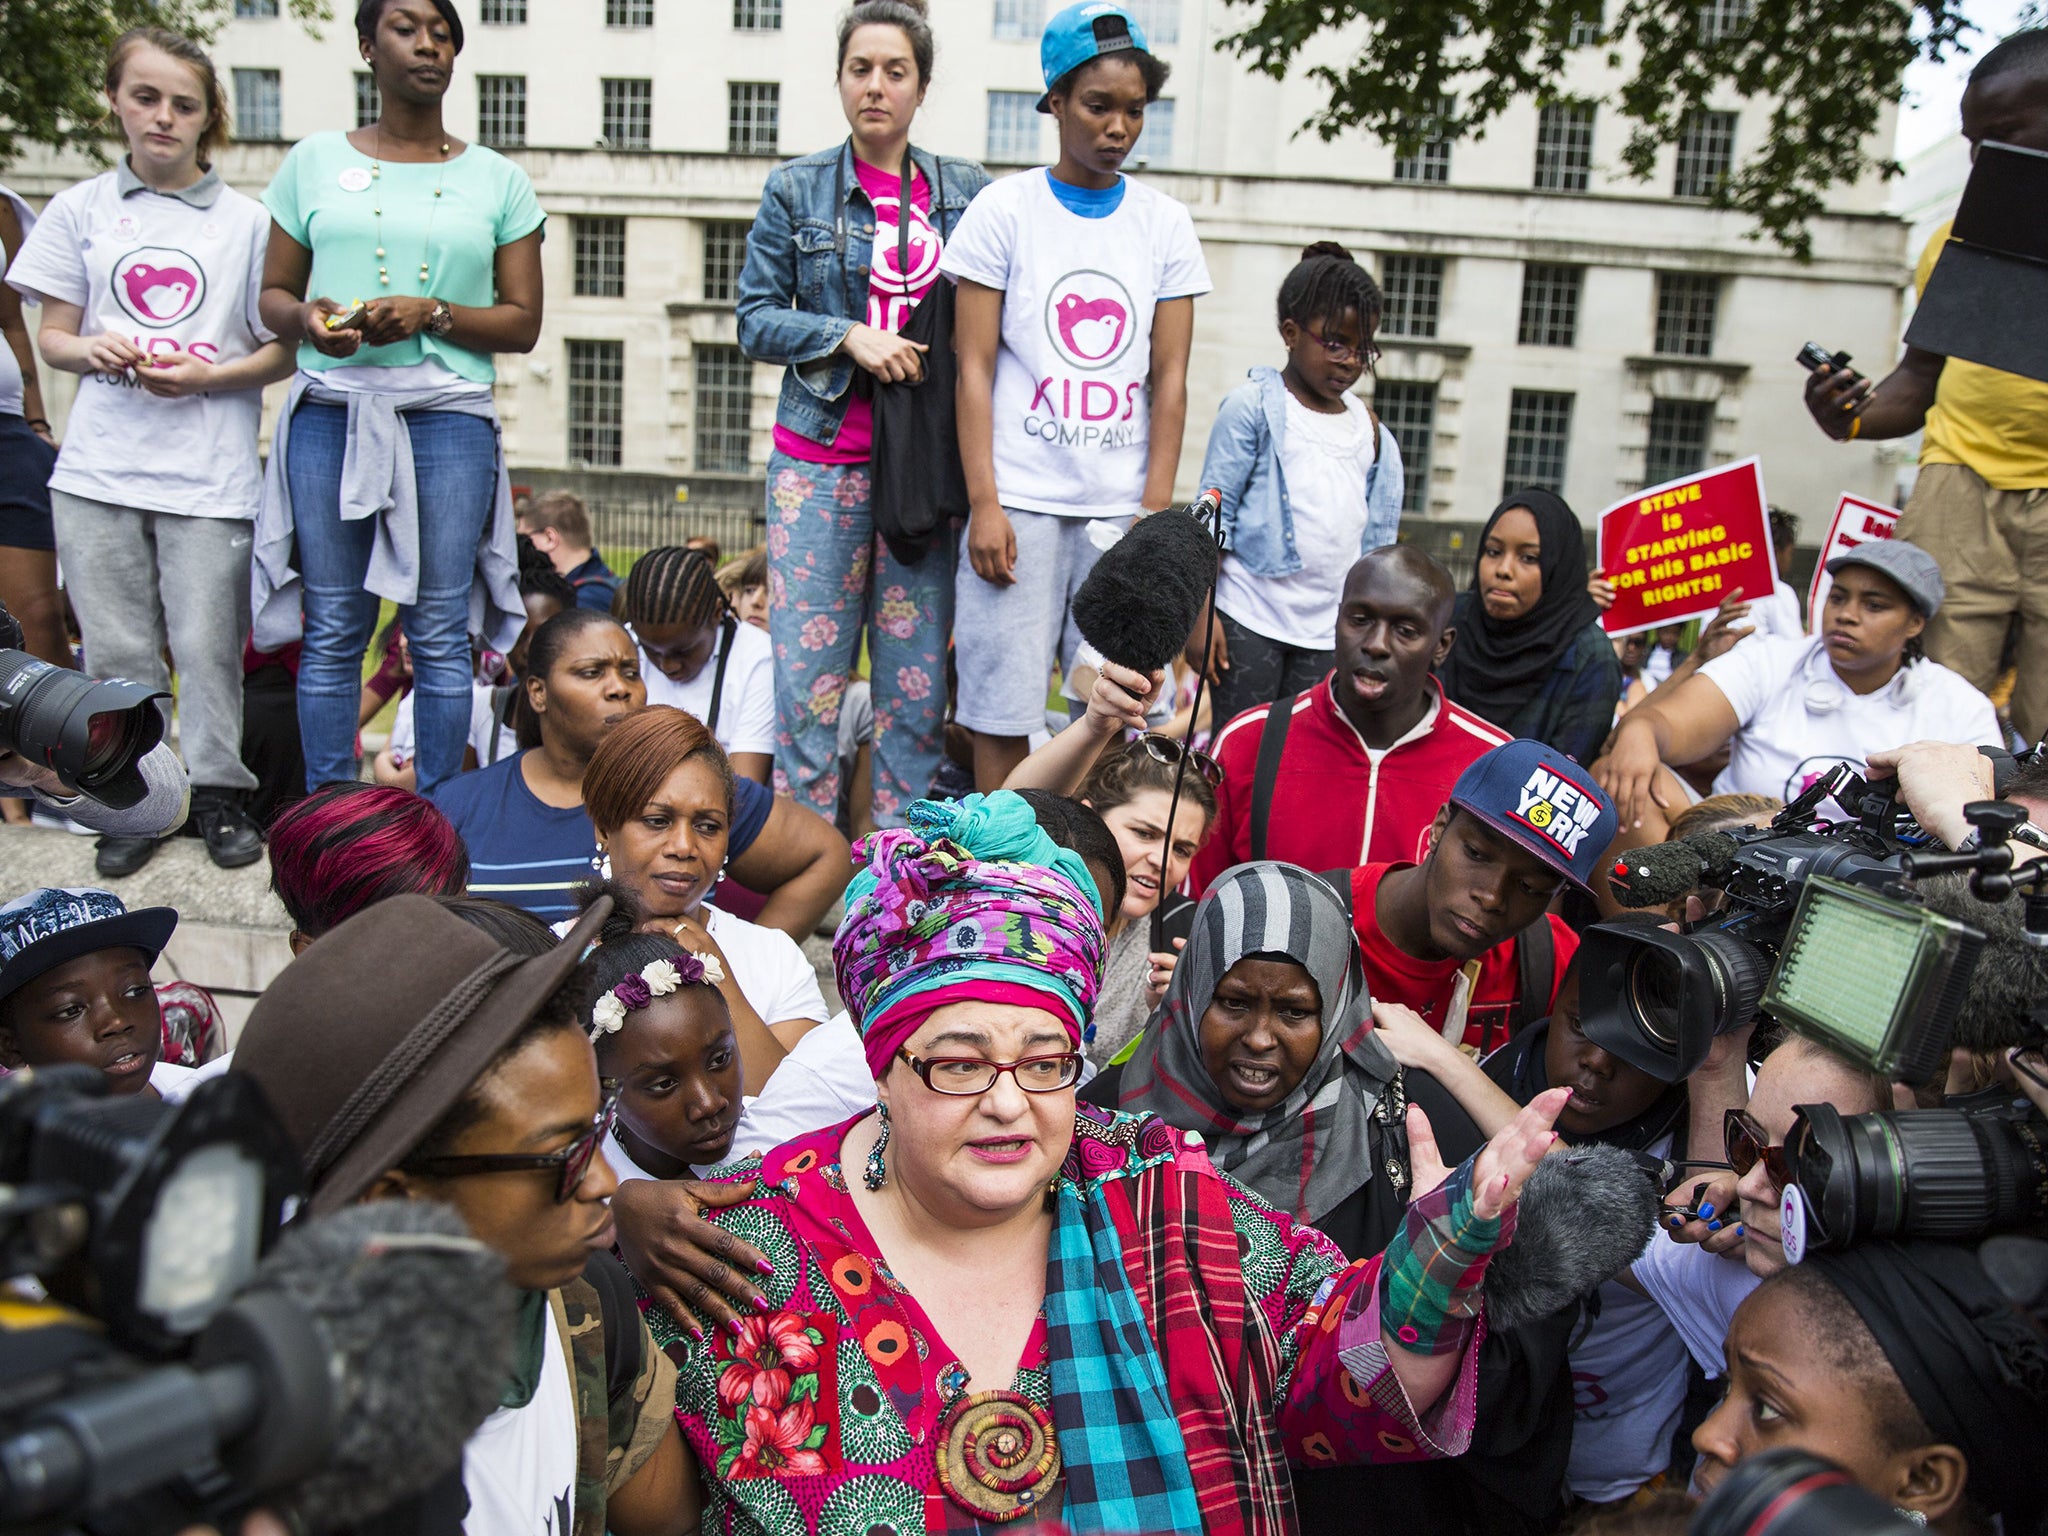 Former chief executive, Camila Batmanghelidjh, was not formally a director at the time the charity collapsed in 2015, but the proceedings will allege that she acted as a de facto director